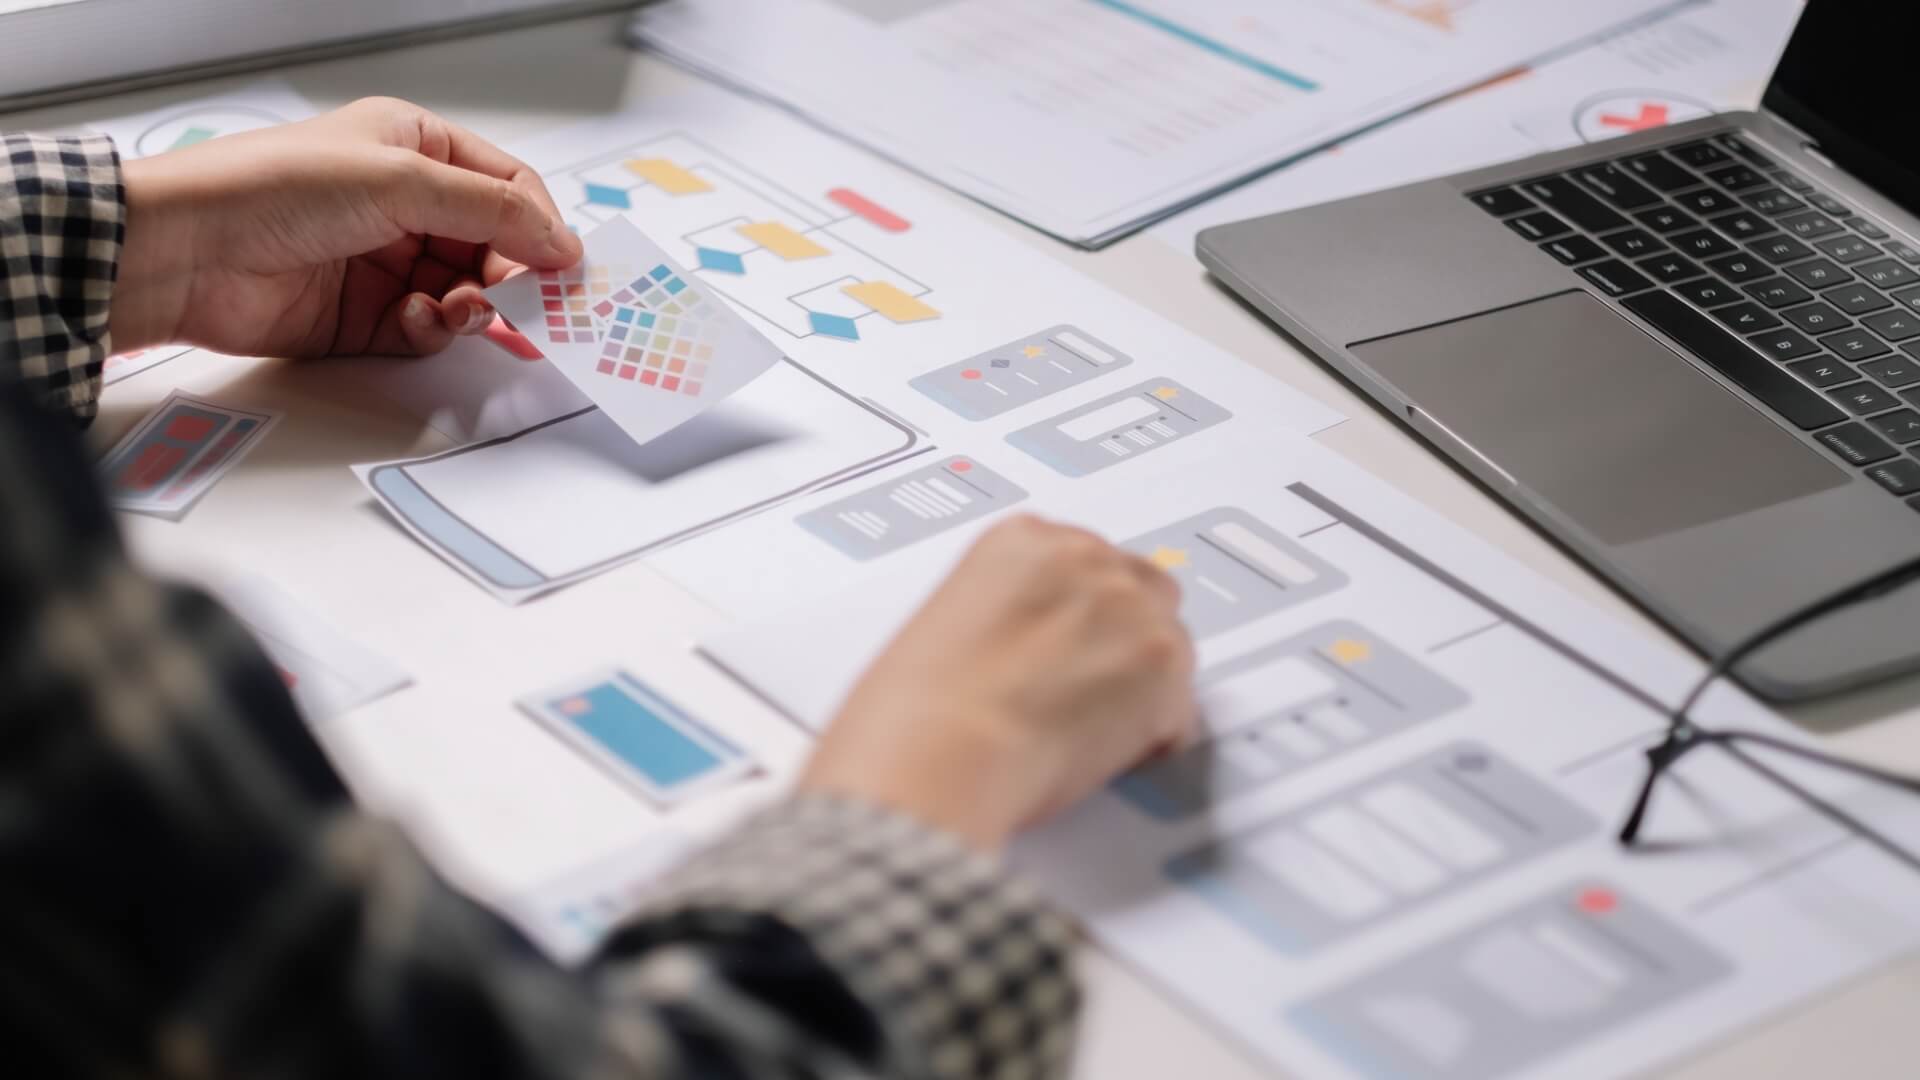 The Importance of UI/UX Design in Product Development